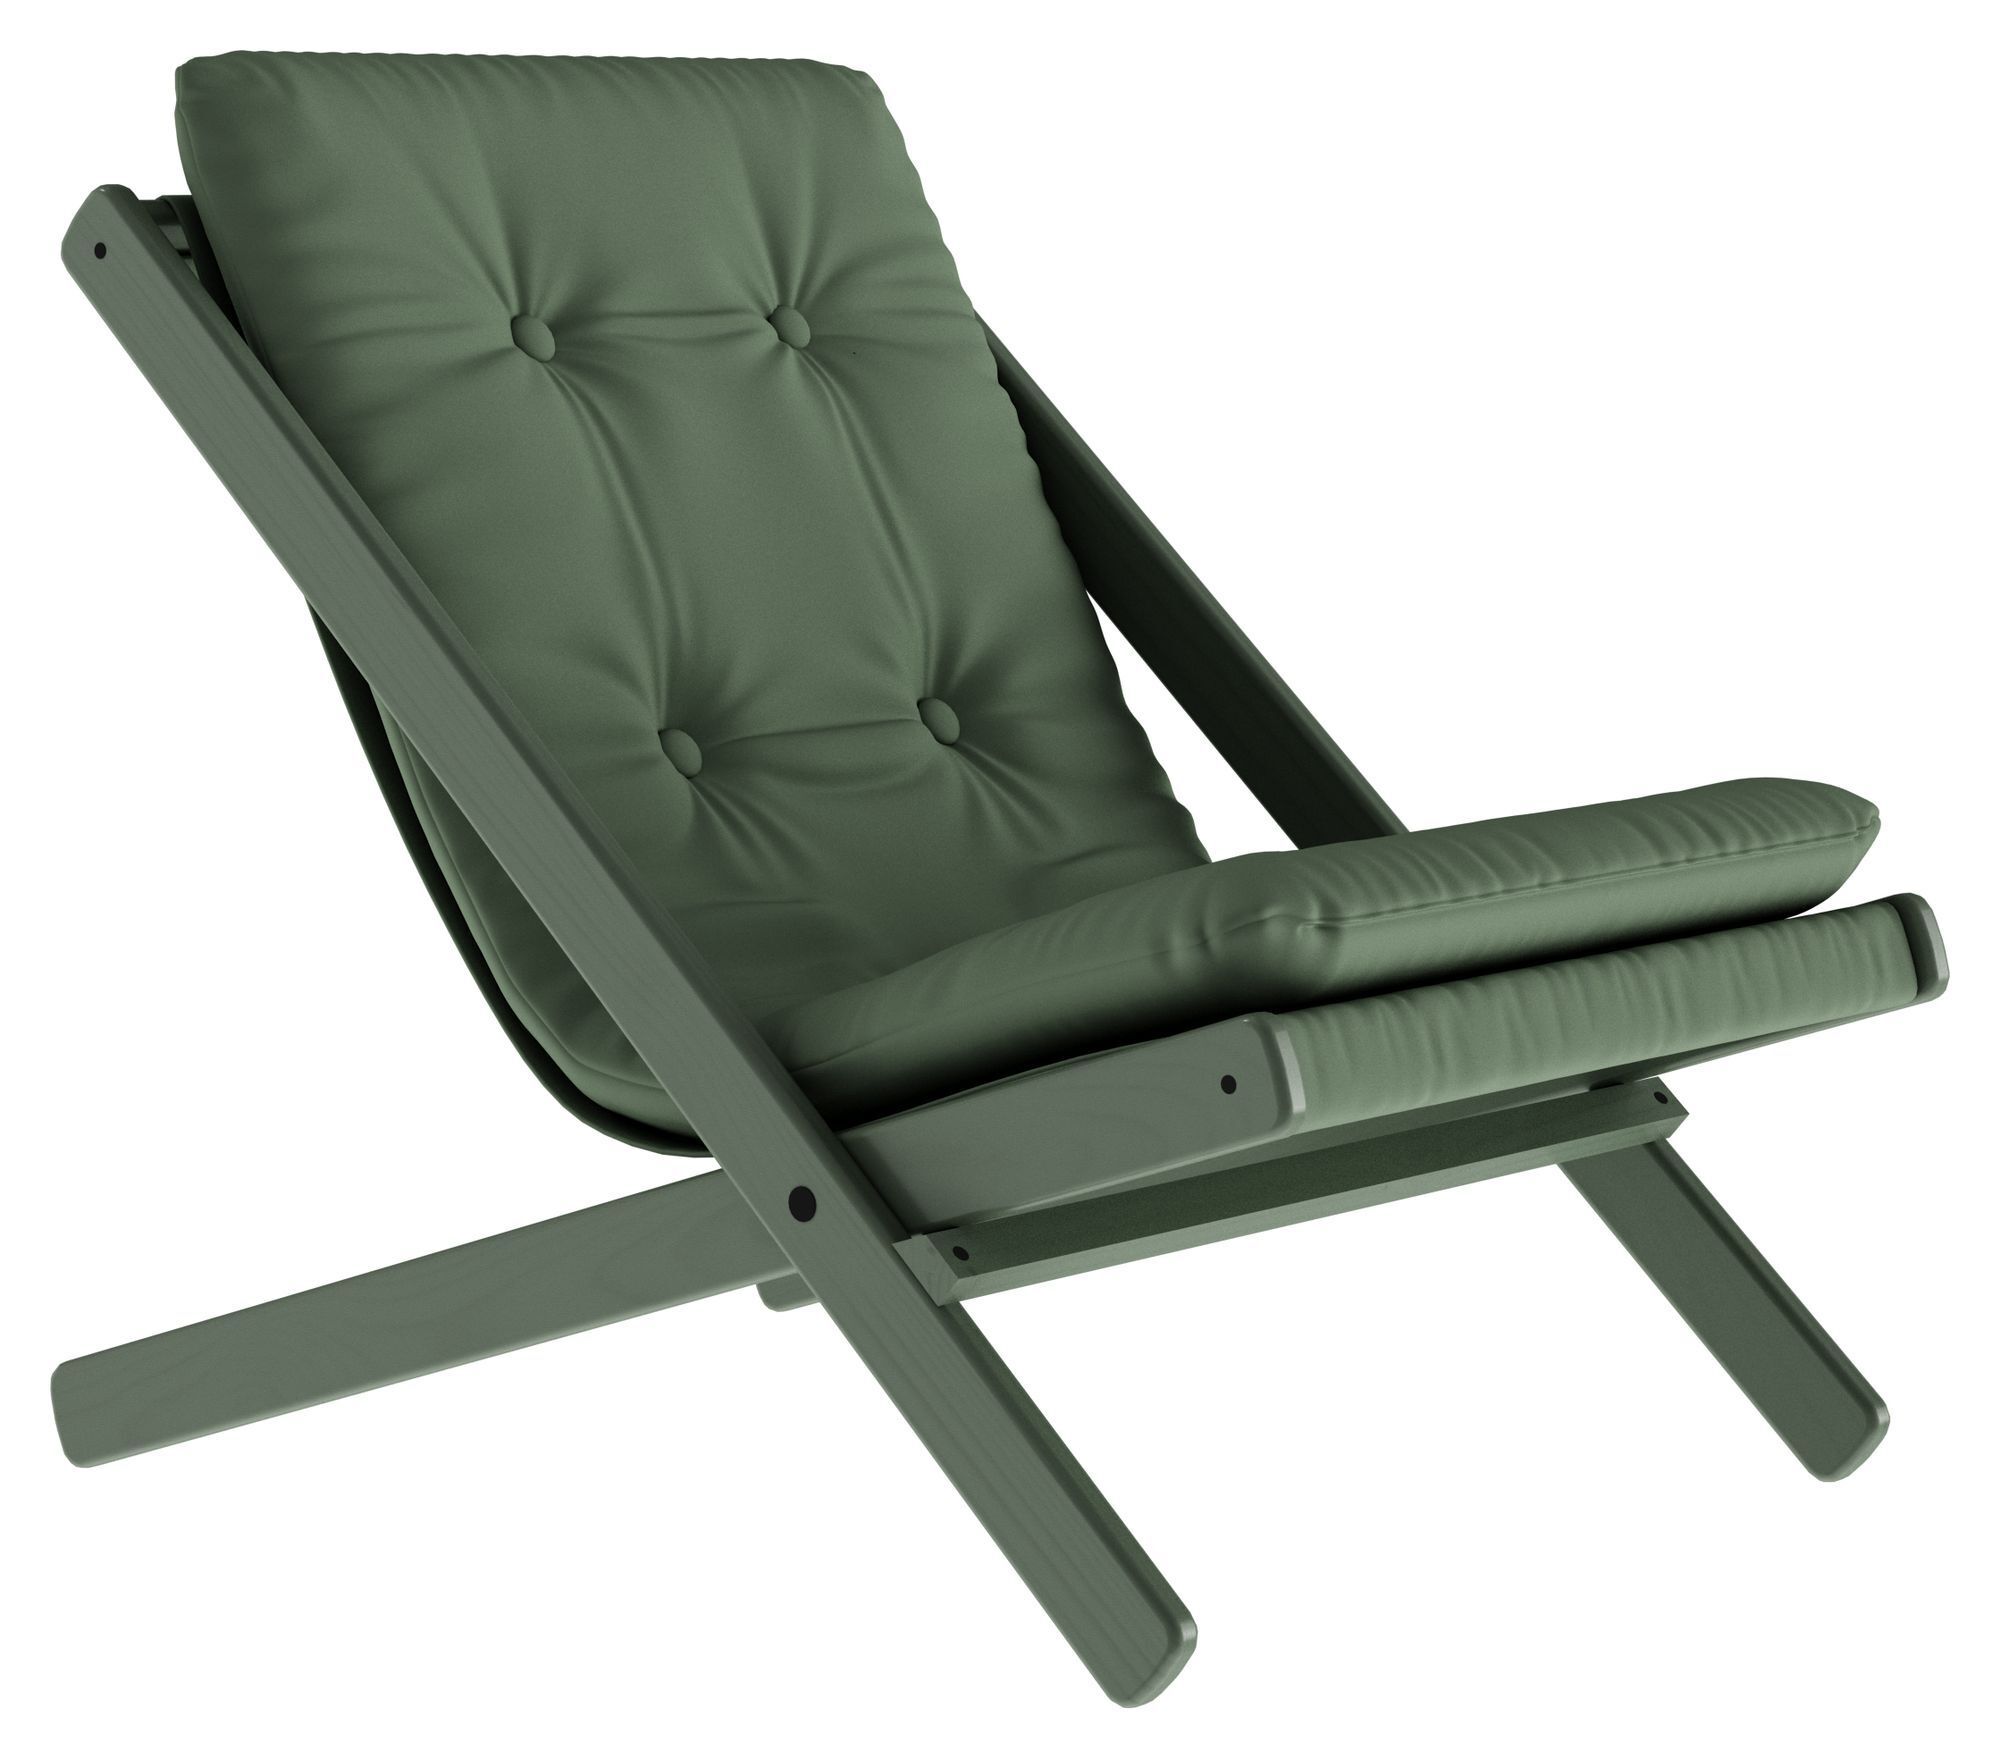 Karup Design Boogie Staycation Loungestol - Lawn Green/Olive Green   Unoliving